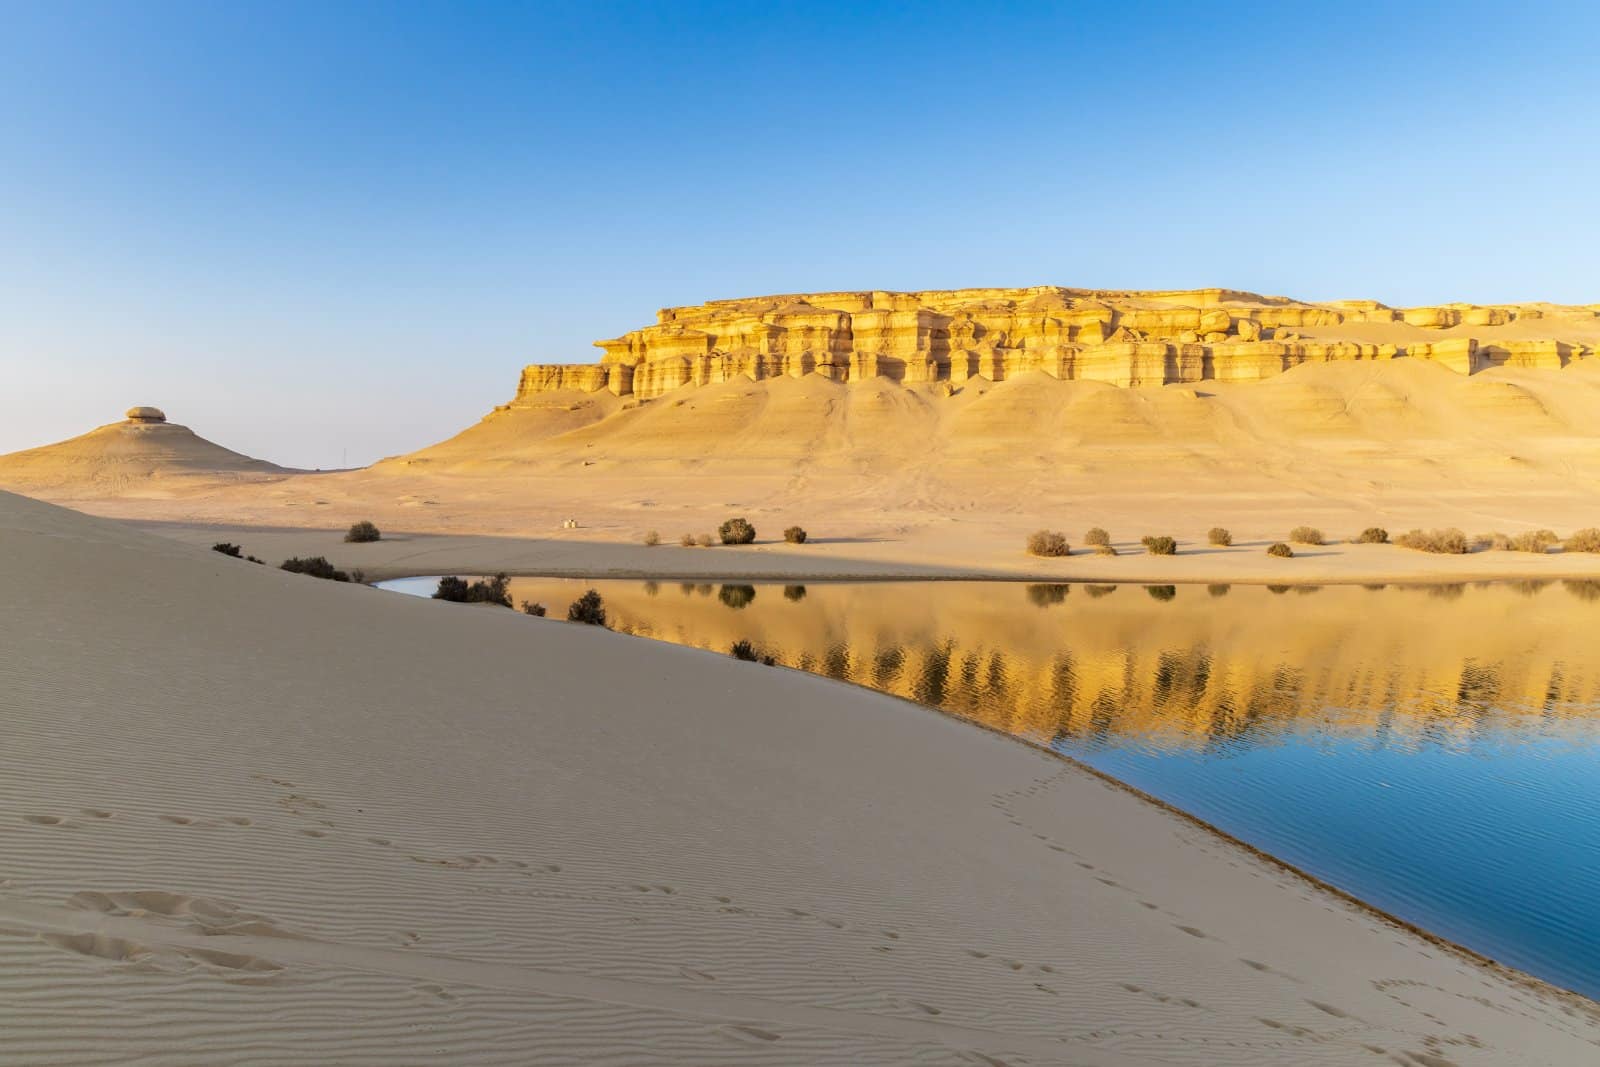 <p class="wp-caption-text">Image Credit: Shutterstock / Emily Marie Wilson</p>  <p><span>The Fayoum Oasis, a verdant haven amidst the desert, offers a glimpse into Egypt’s diverse landscapes and history. Known for its water wheels introduced by the Ptolemies, the oasis is a rich agricultural area with a history stretching back millennia. Attractions like the Wadi El Rayan waterfalls, the Whale Valley where fossils of prehistoric whales have been uncovered, and the ancient city of Karanis, reveal the oasis’s natural, historical, and cultural layers. The blend of lush landscapes, ancient ruins, and unique geological sites makes the Fayoum Oasis a captivating destination for those exploring beyond Egypt’s traditional tourist paths.</span></p>